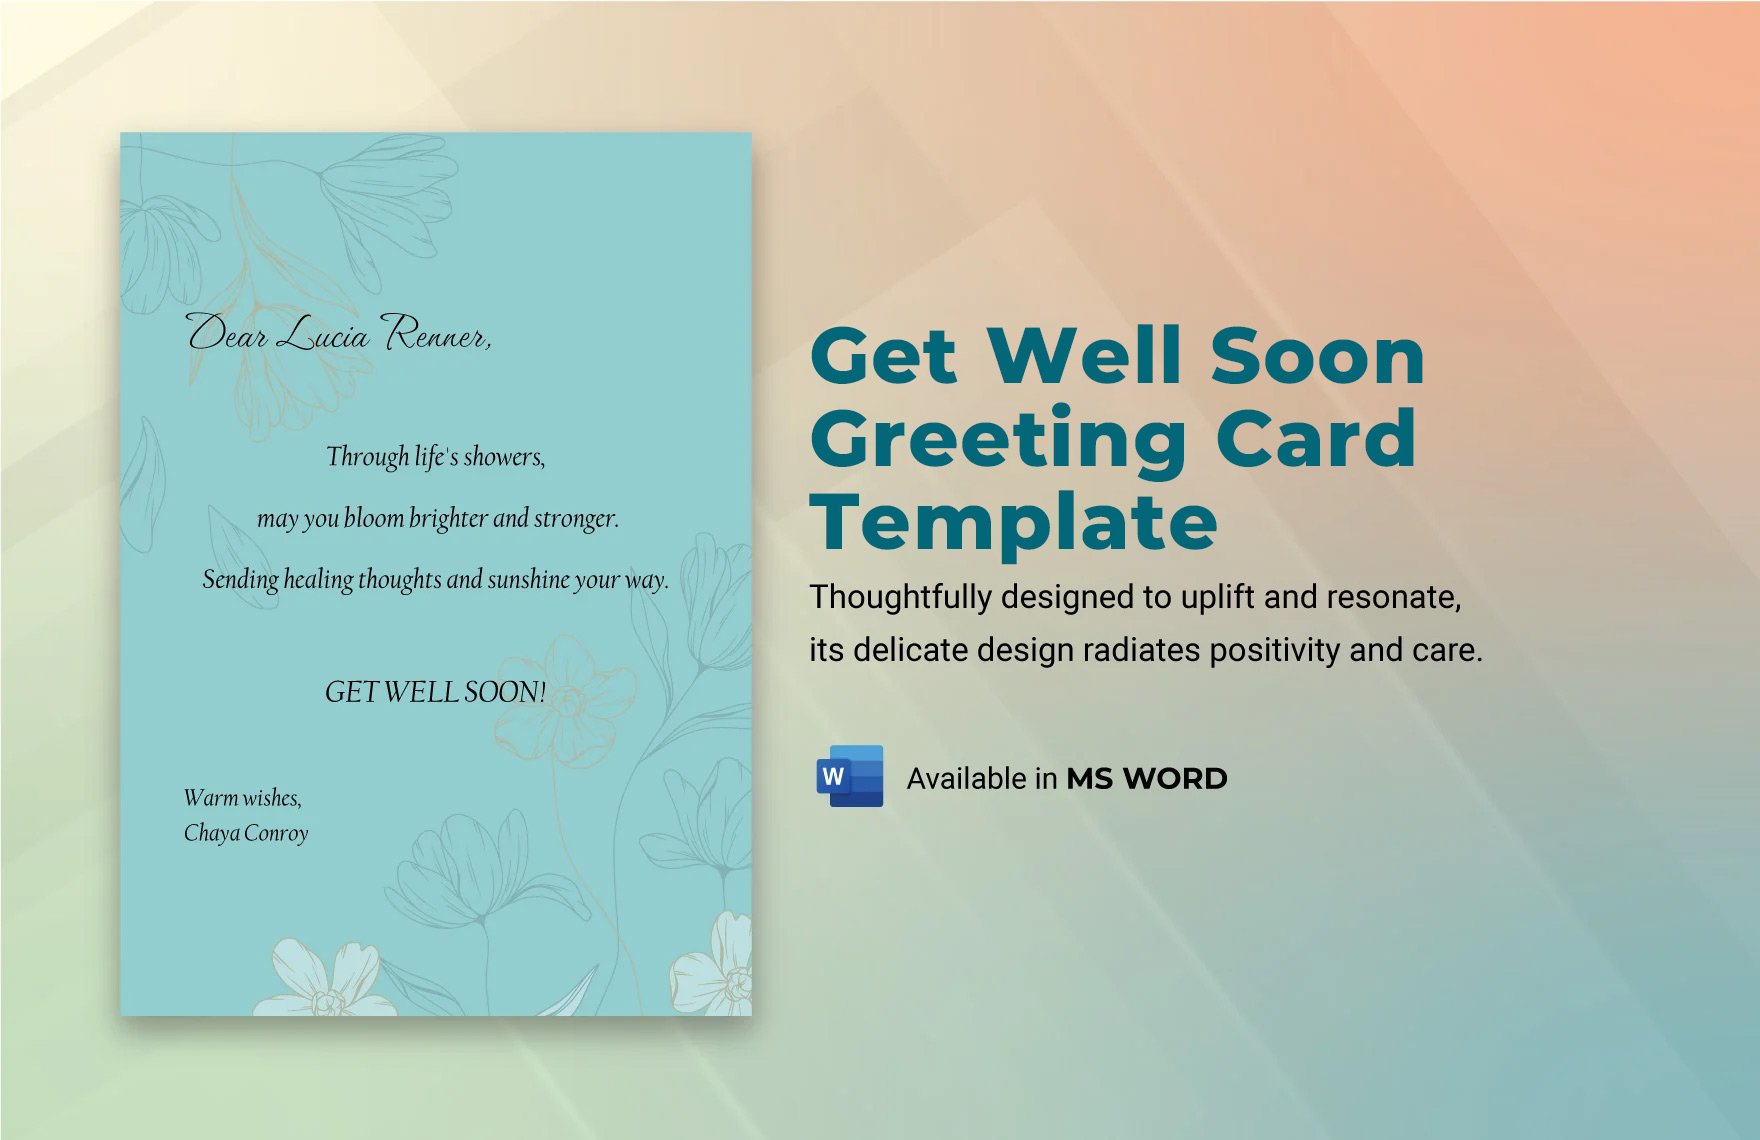 Get Well Soon Greeting Card Template